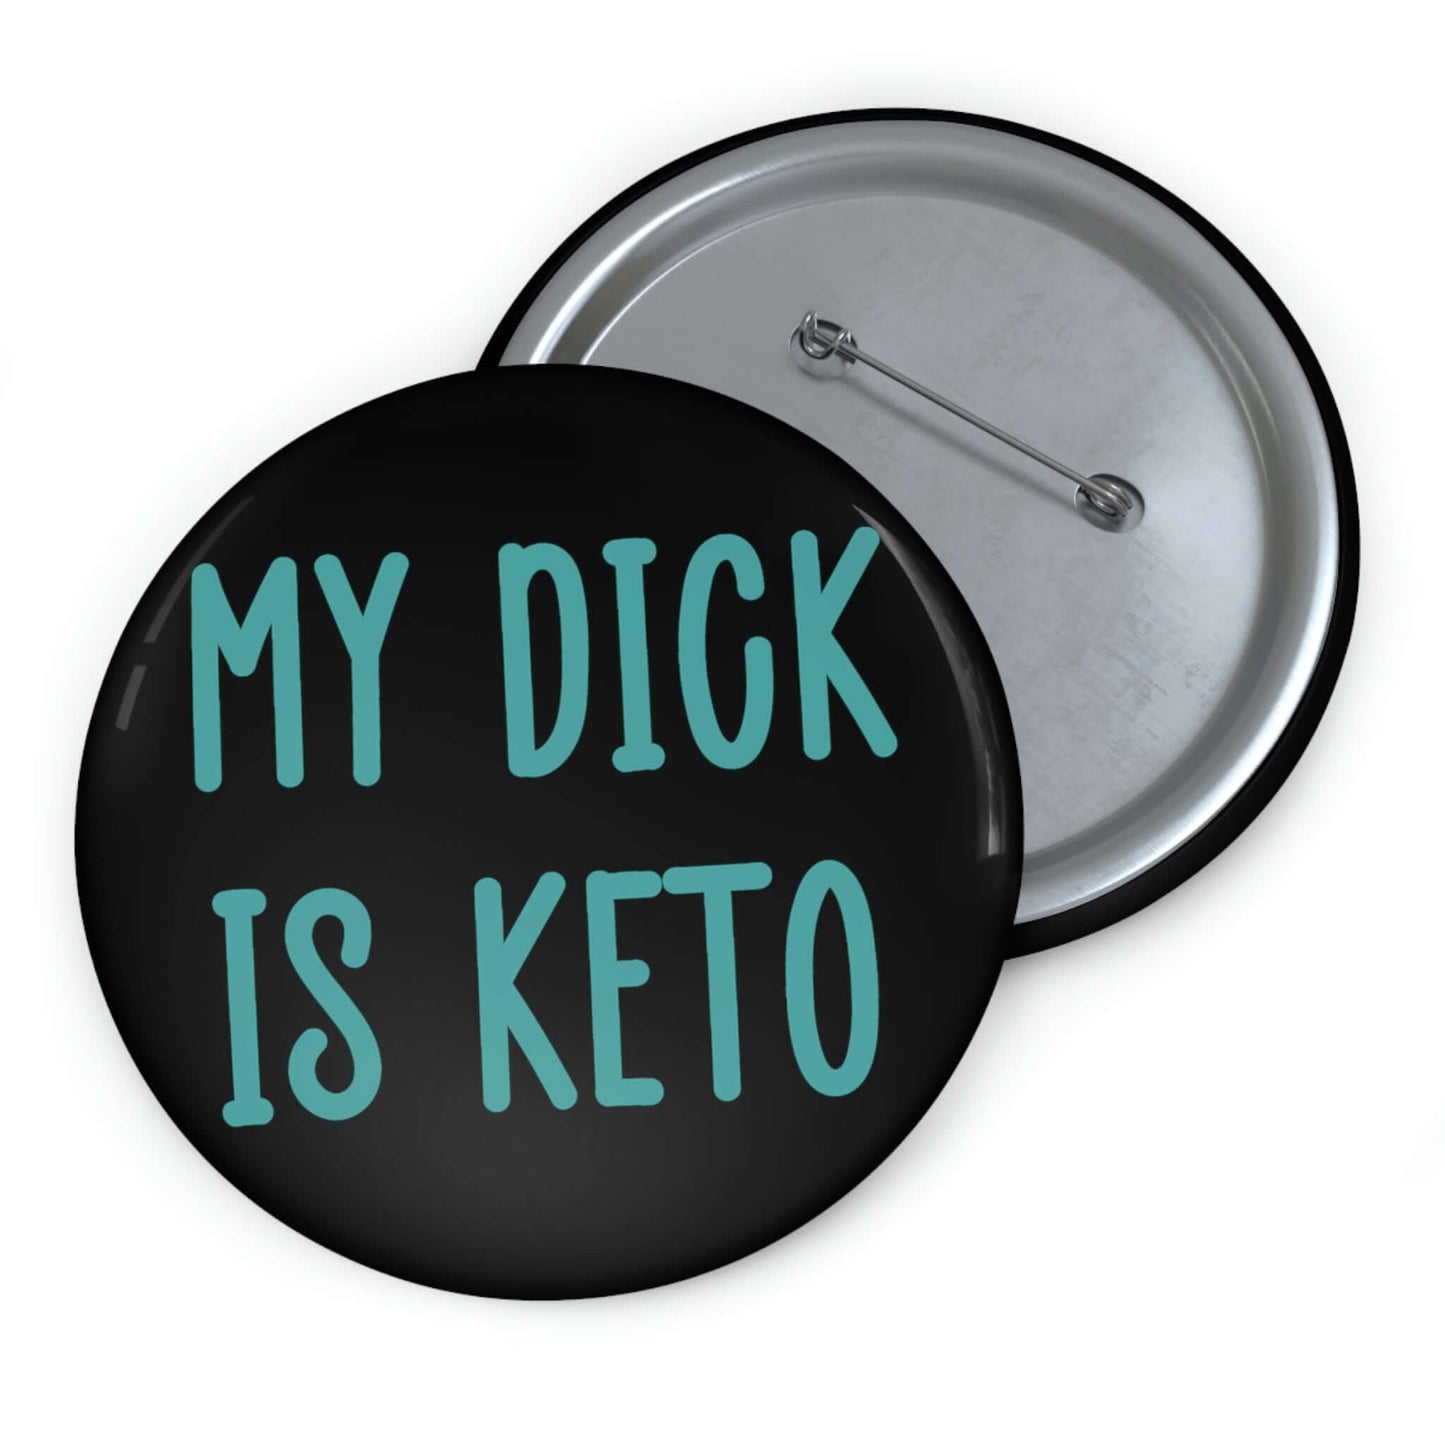 My dick is keto pinback button